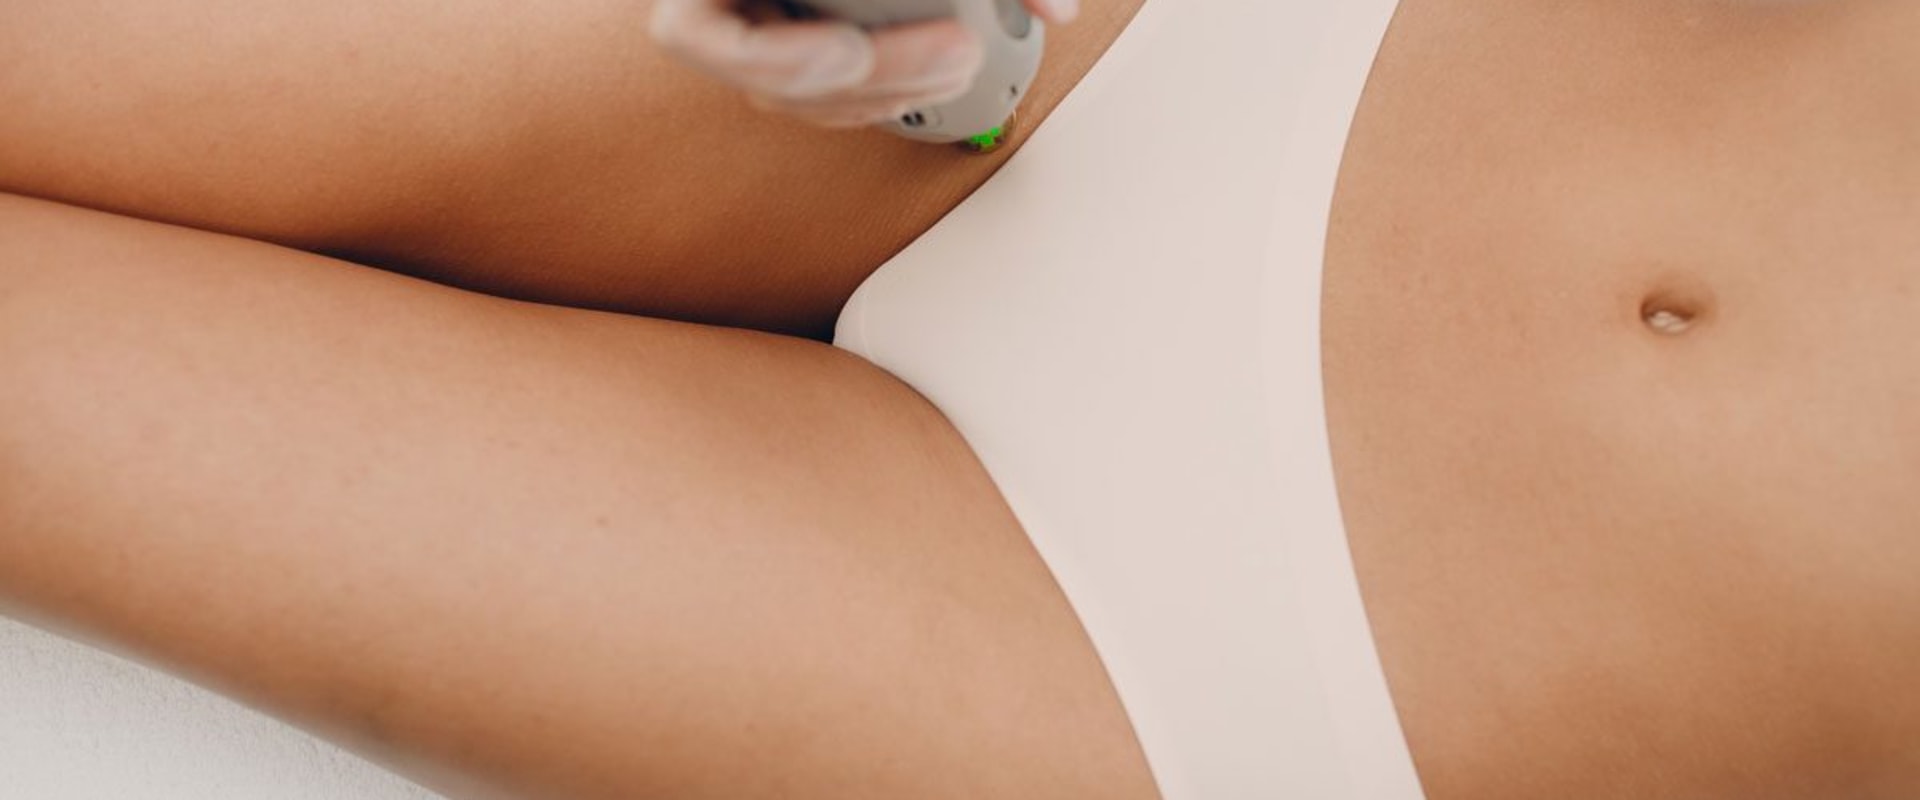 Reduced chance of ingrown hairs: Benefits of Laser Hair Removal